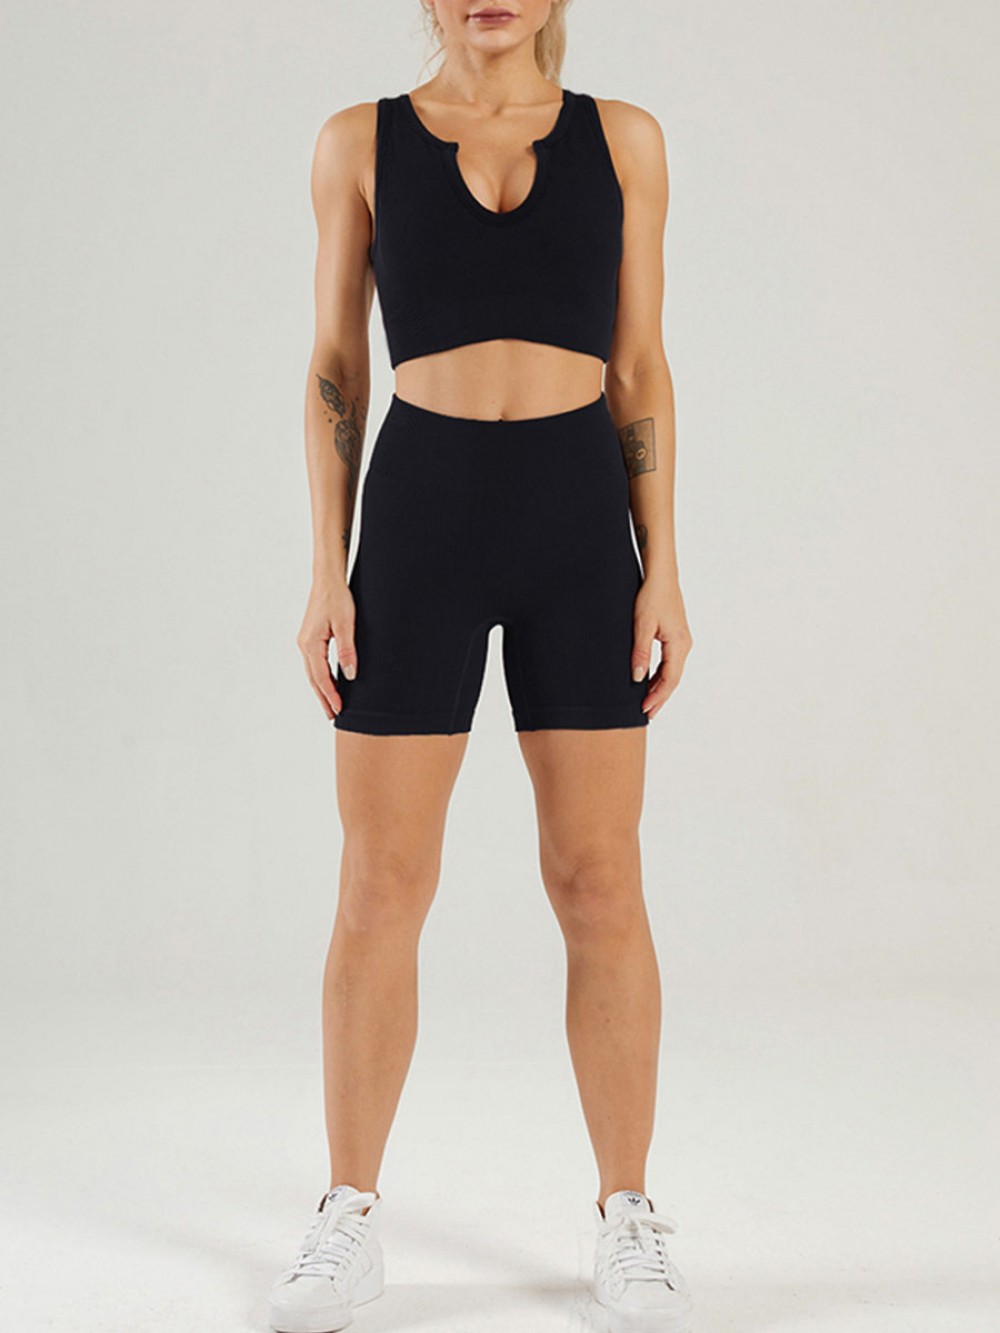 Black Sleeveless Crop Seamless Yogawear Outfit Quality Assured